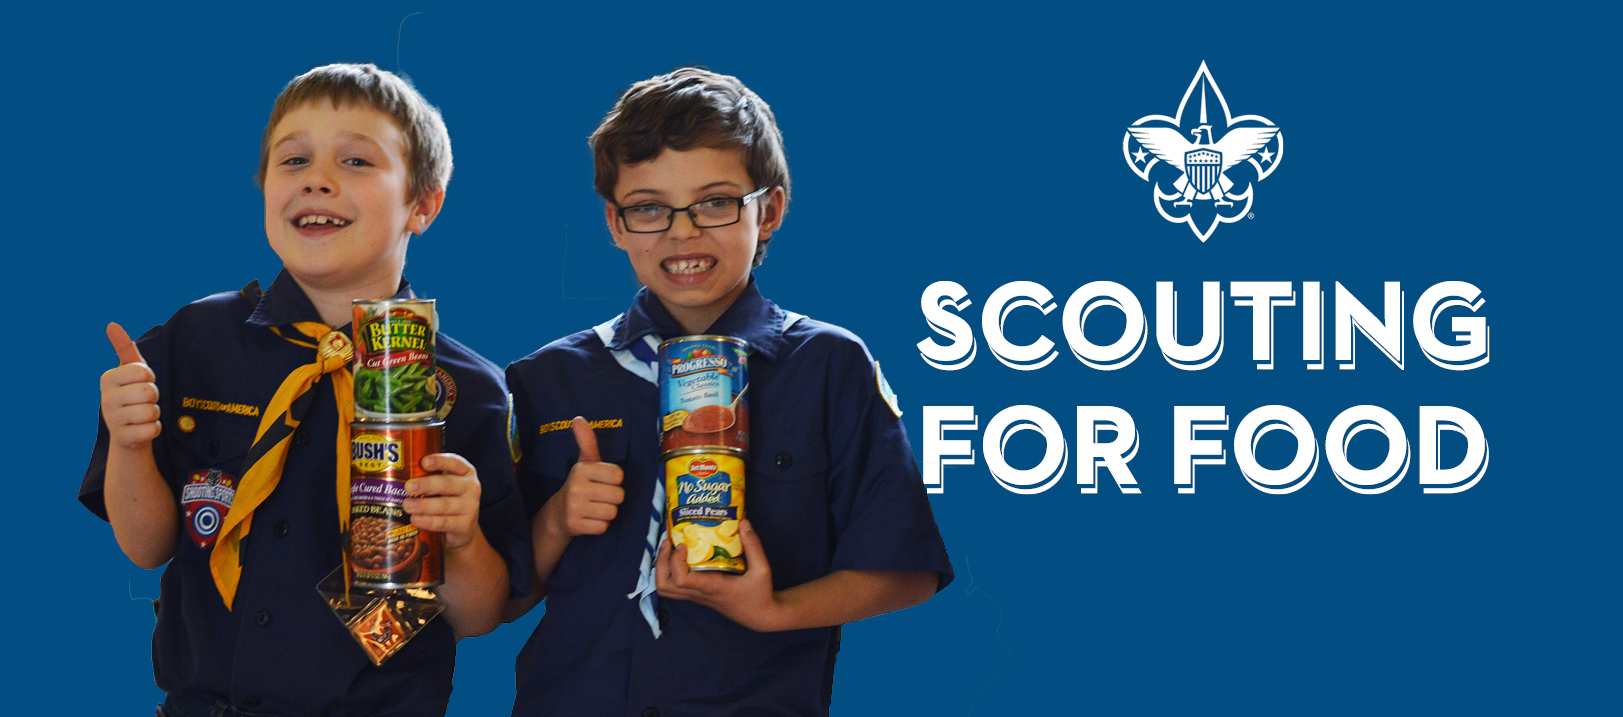 Boy Scouts are Scouting for Food this March